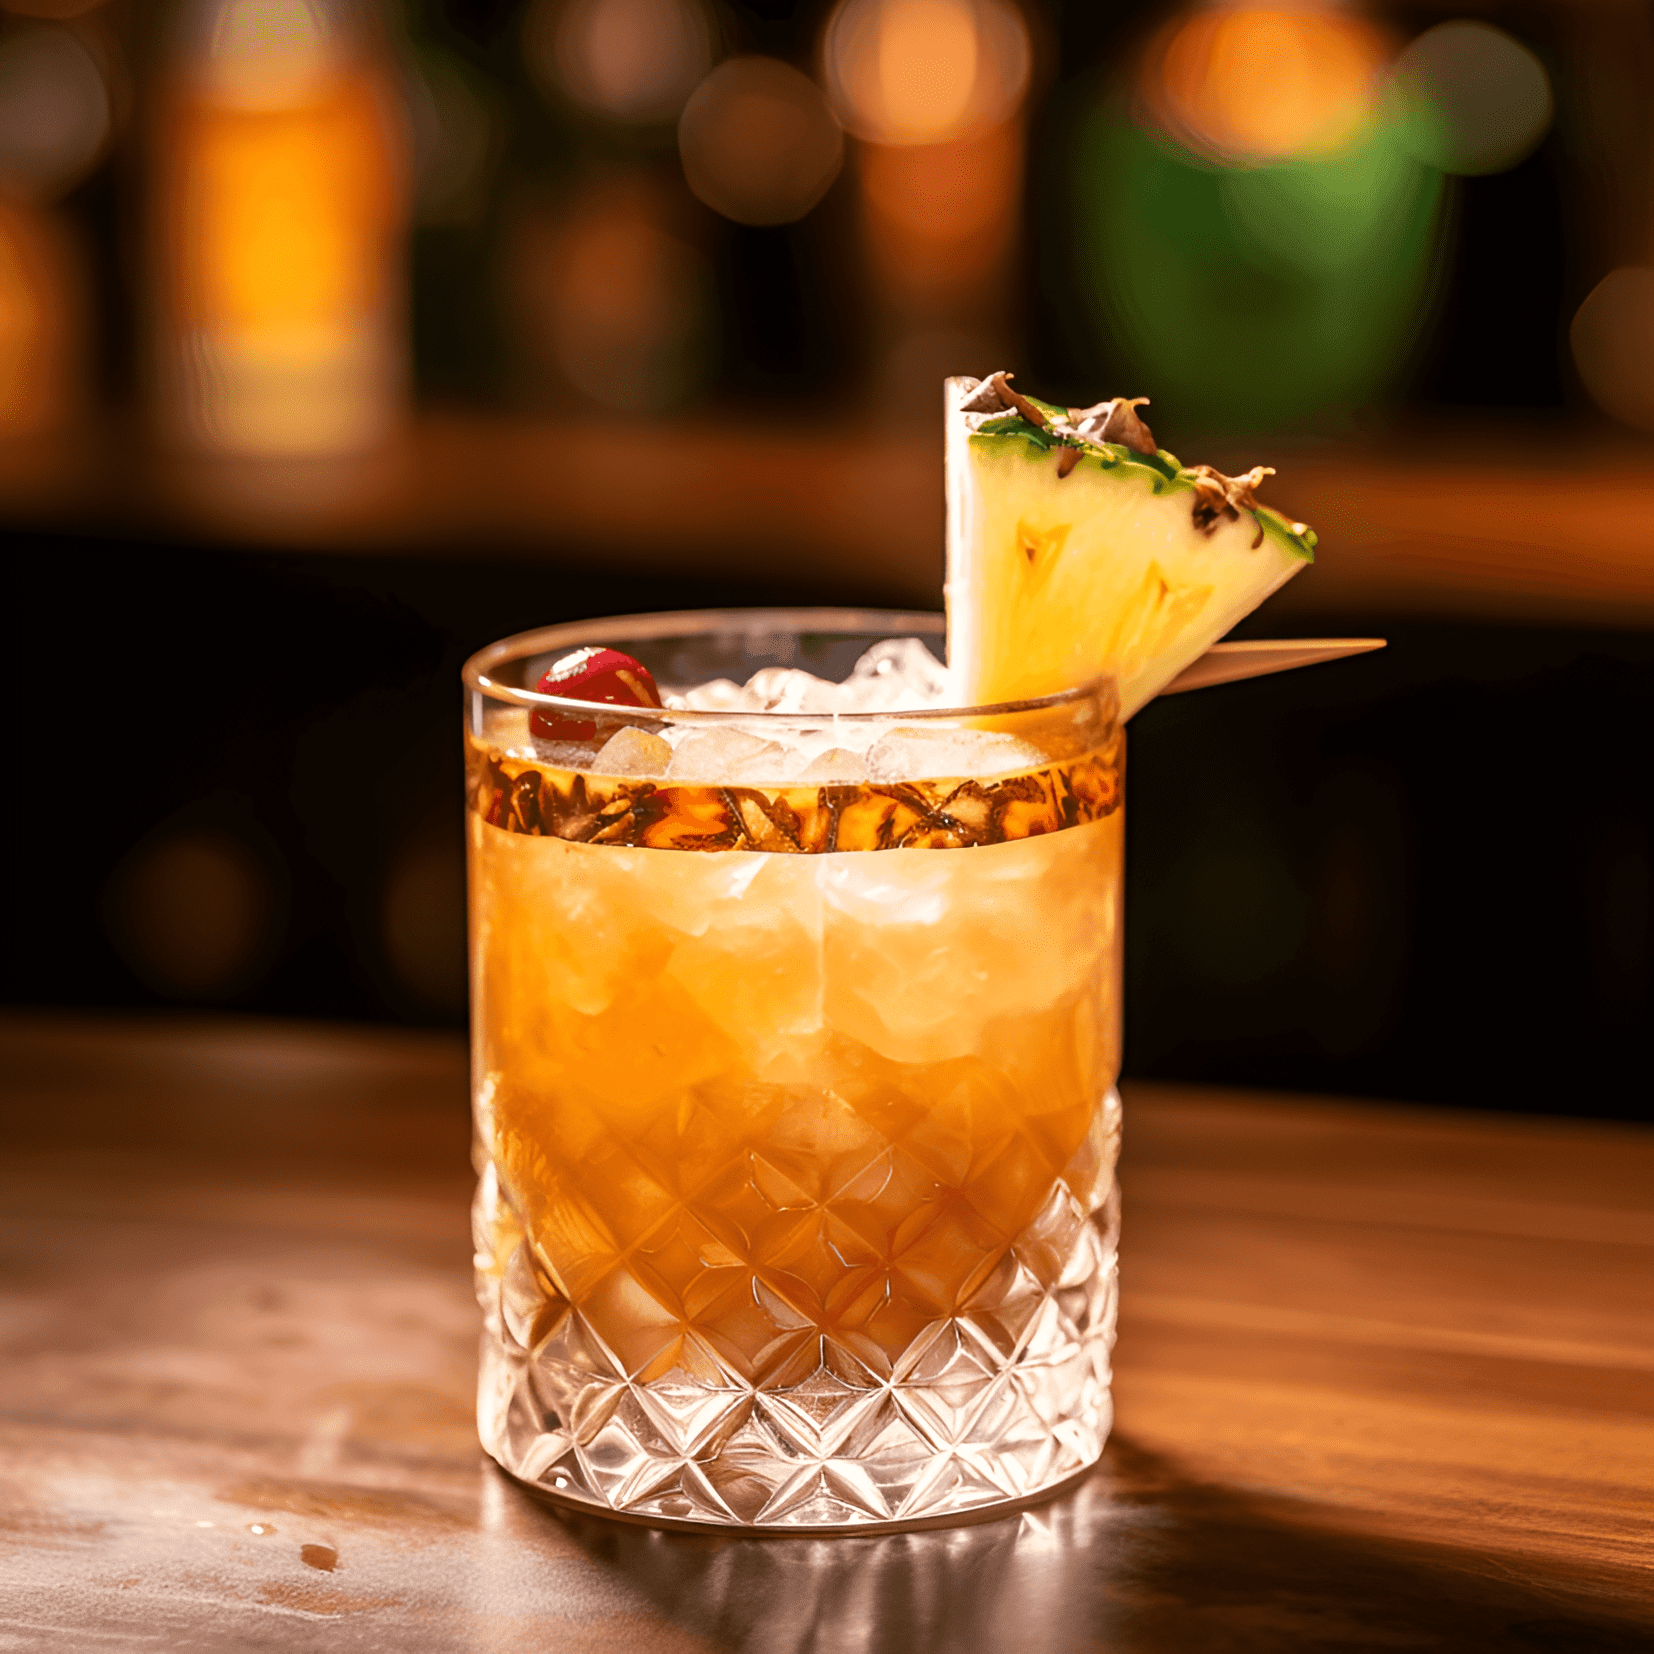 Tortuga Cocktail Recipe - The Tortuga cocktail is a delightful mix of sweet, sour, and spicy flavors. The combination of rum, pineapple juice, and lime creates a refreshing tropical taste, while the ginger and jalapeño add a subtle kick.